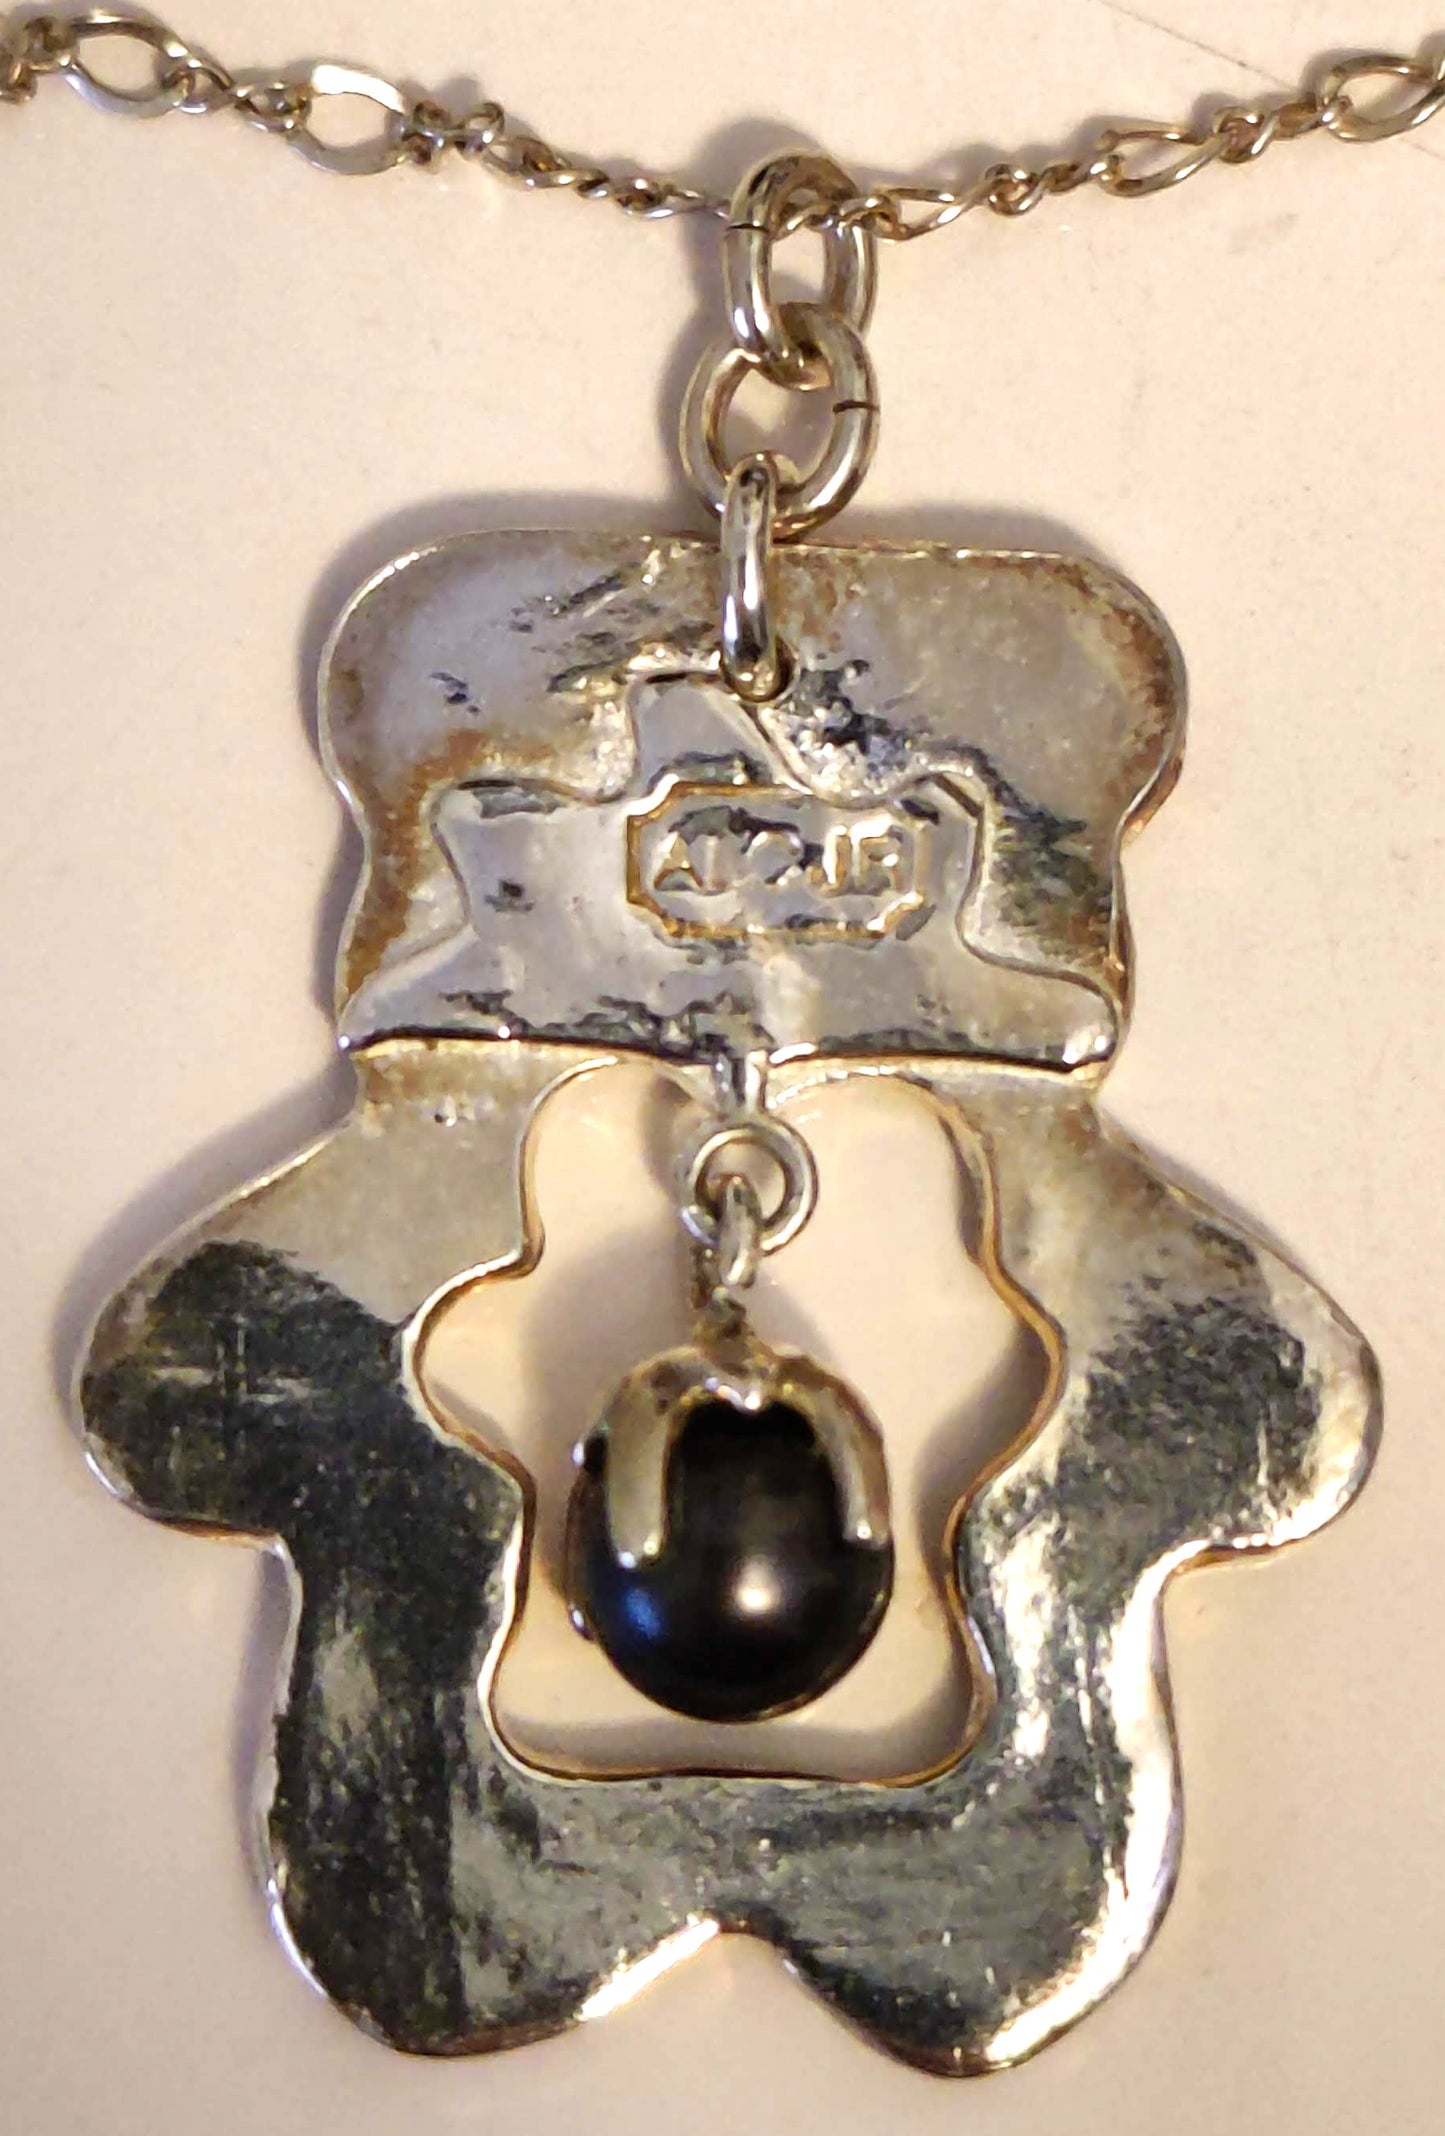 Teddy Bear Pendant w/Black Culture Pearl and 20" Sterling Silver Chain